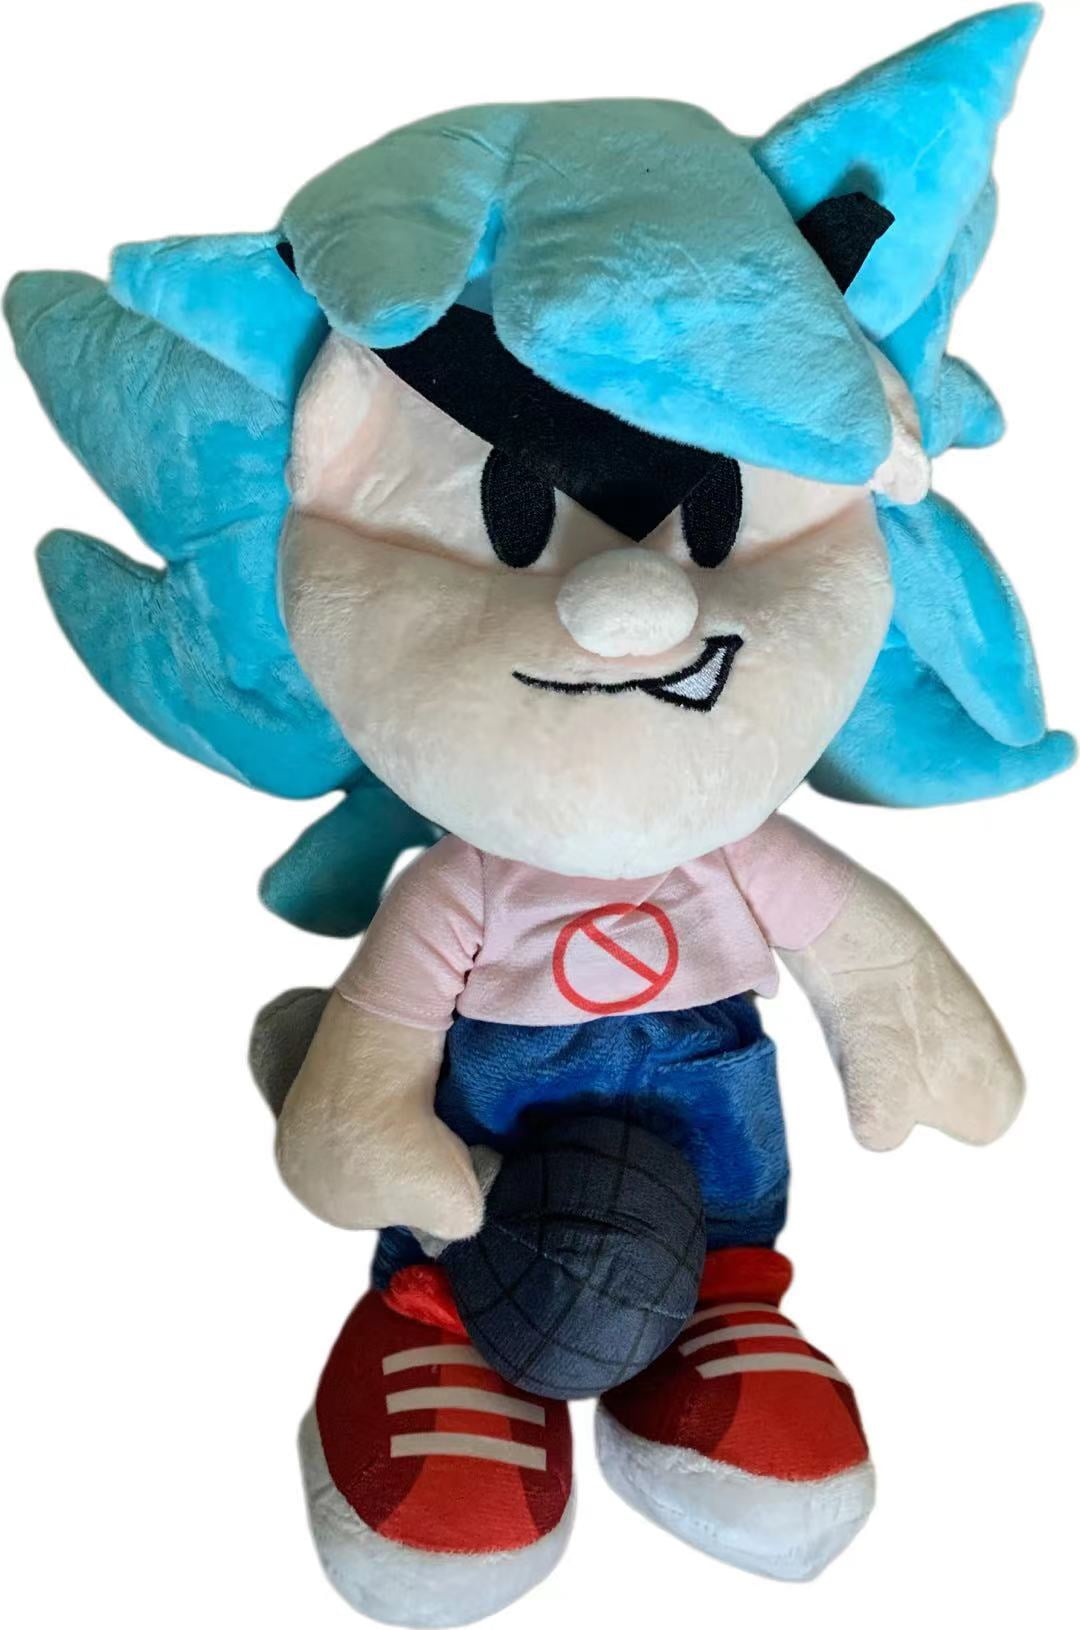 Friday Night Funkin Plush, Friday Night Funkin Plushies, Friday Night  Funkin Merch Plush, Boyfriend Plush, Boy Doll with Microphone, Used for 